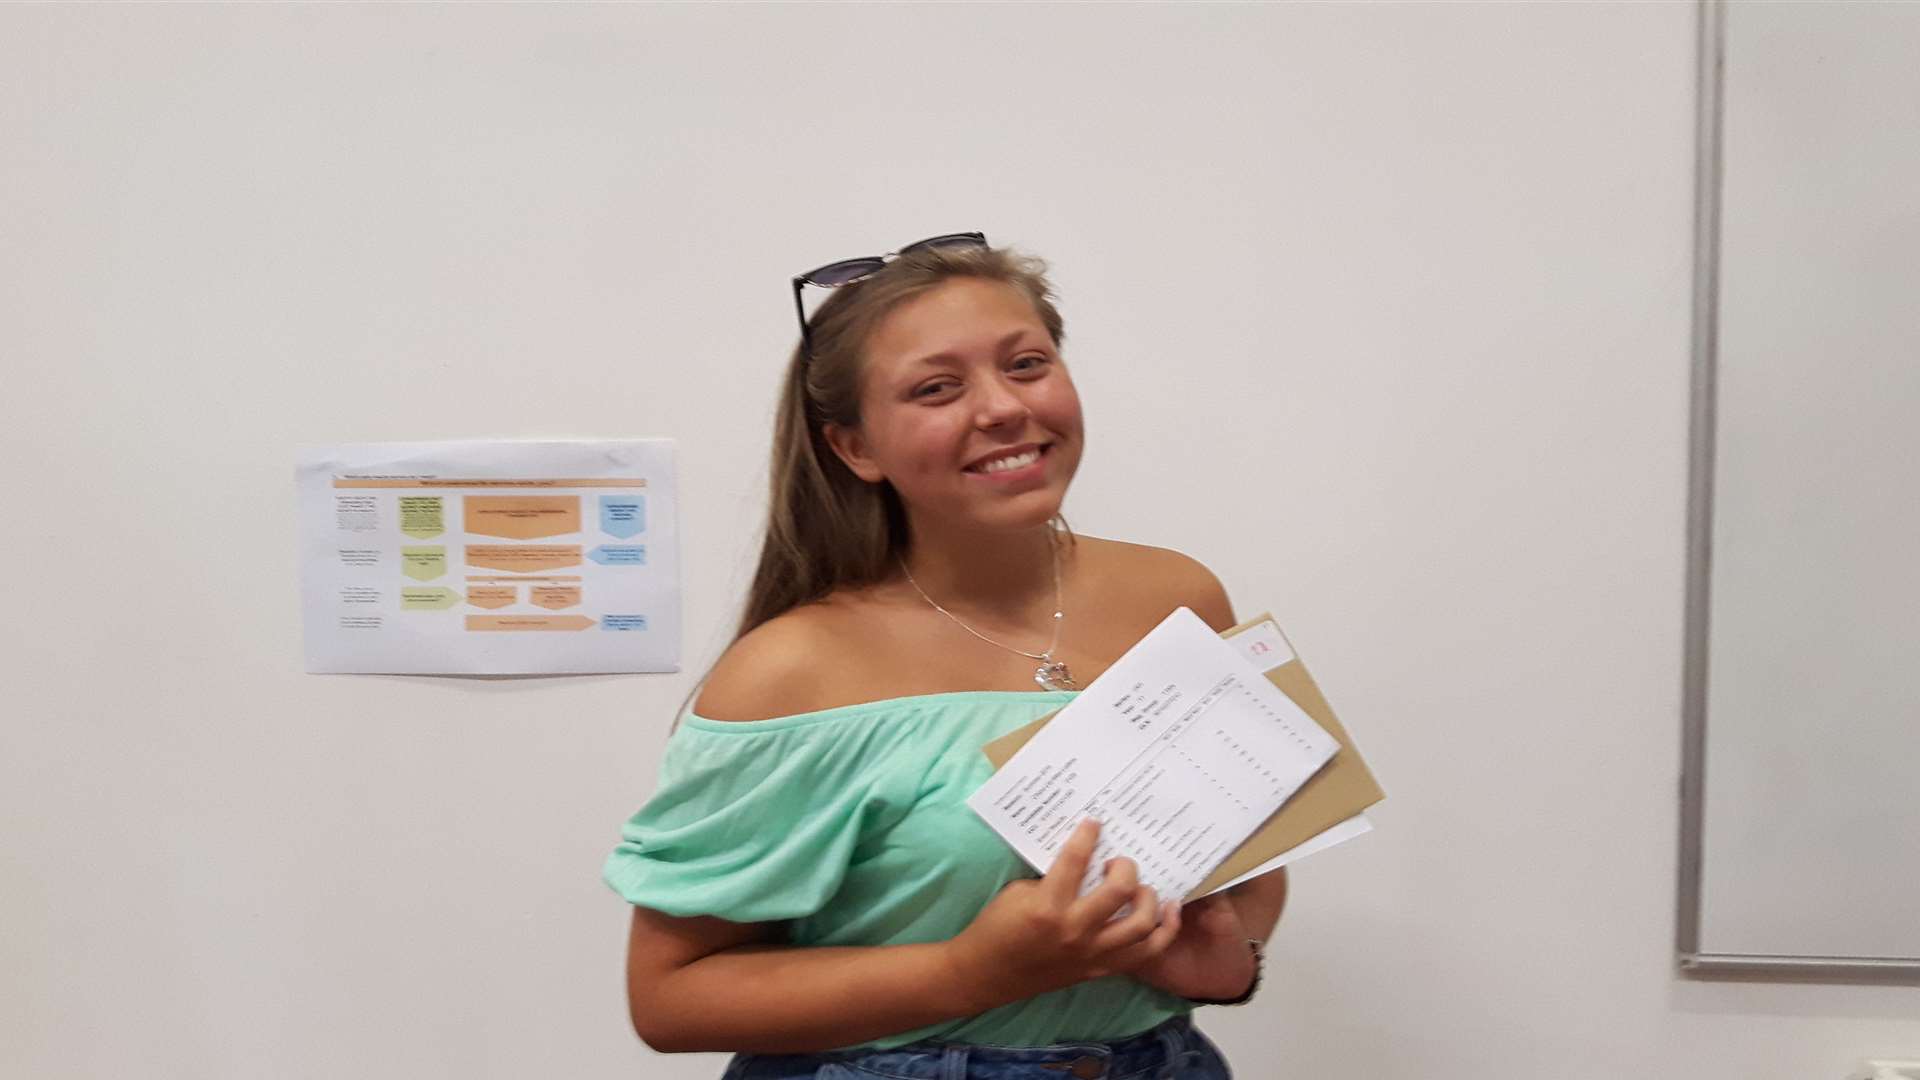 Chloe Ludlow celebrated achieving an A* along with four A grades and five B grades in her GCSEs